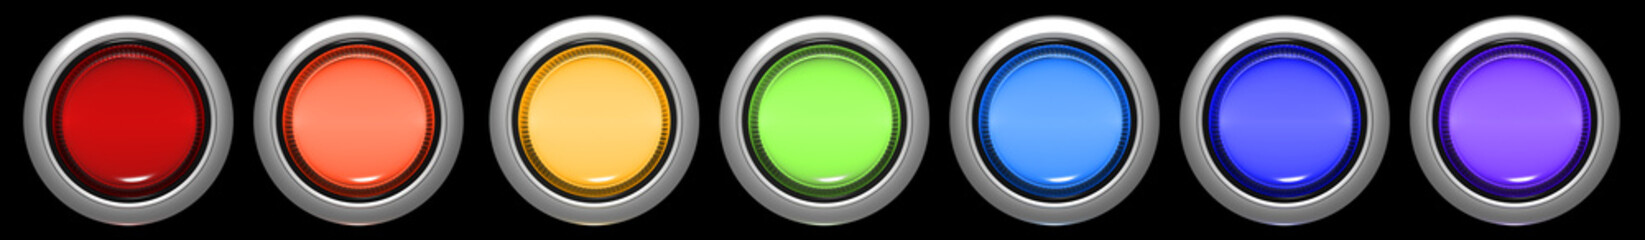  Glowing buttons with rainbow colors on an isolated background. 3d render